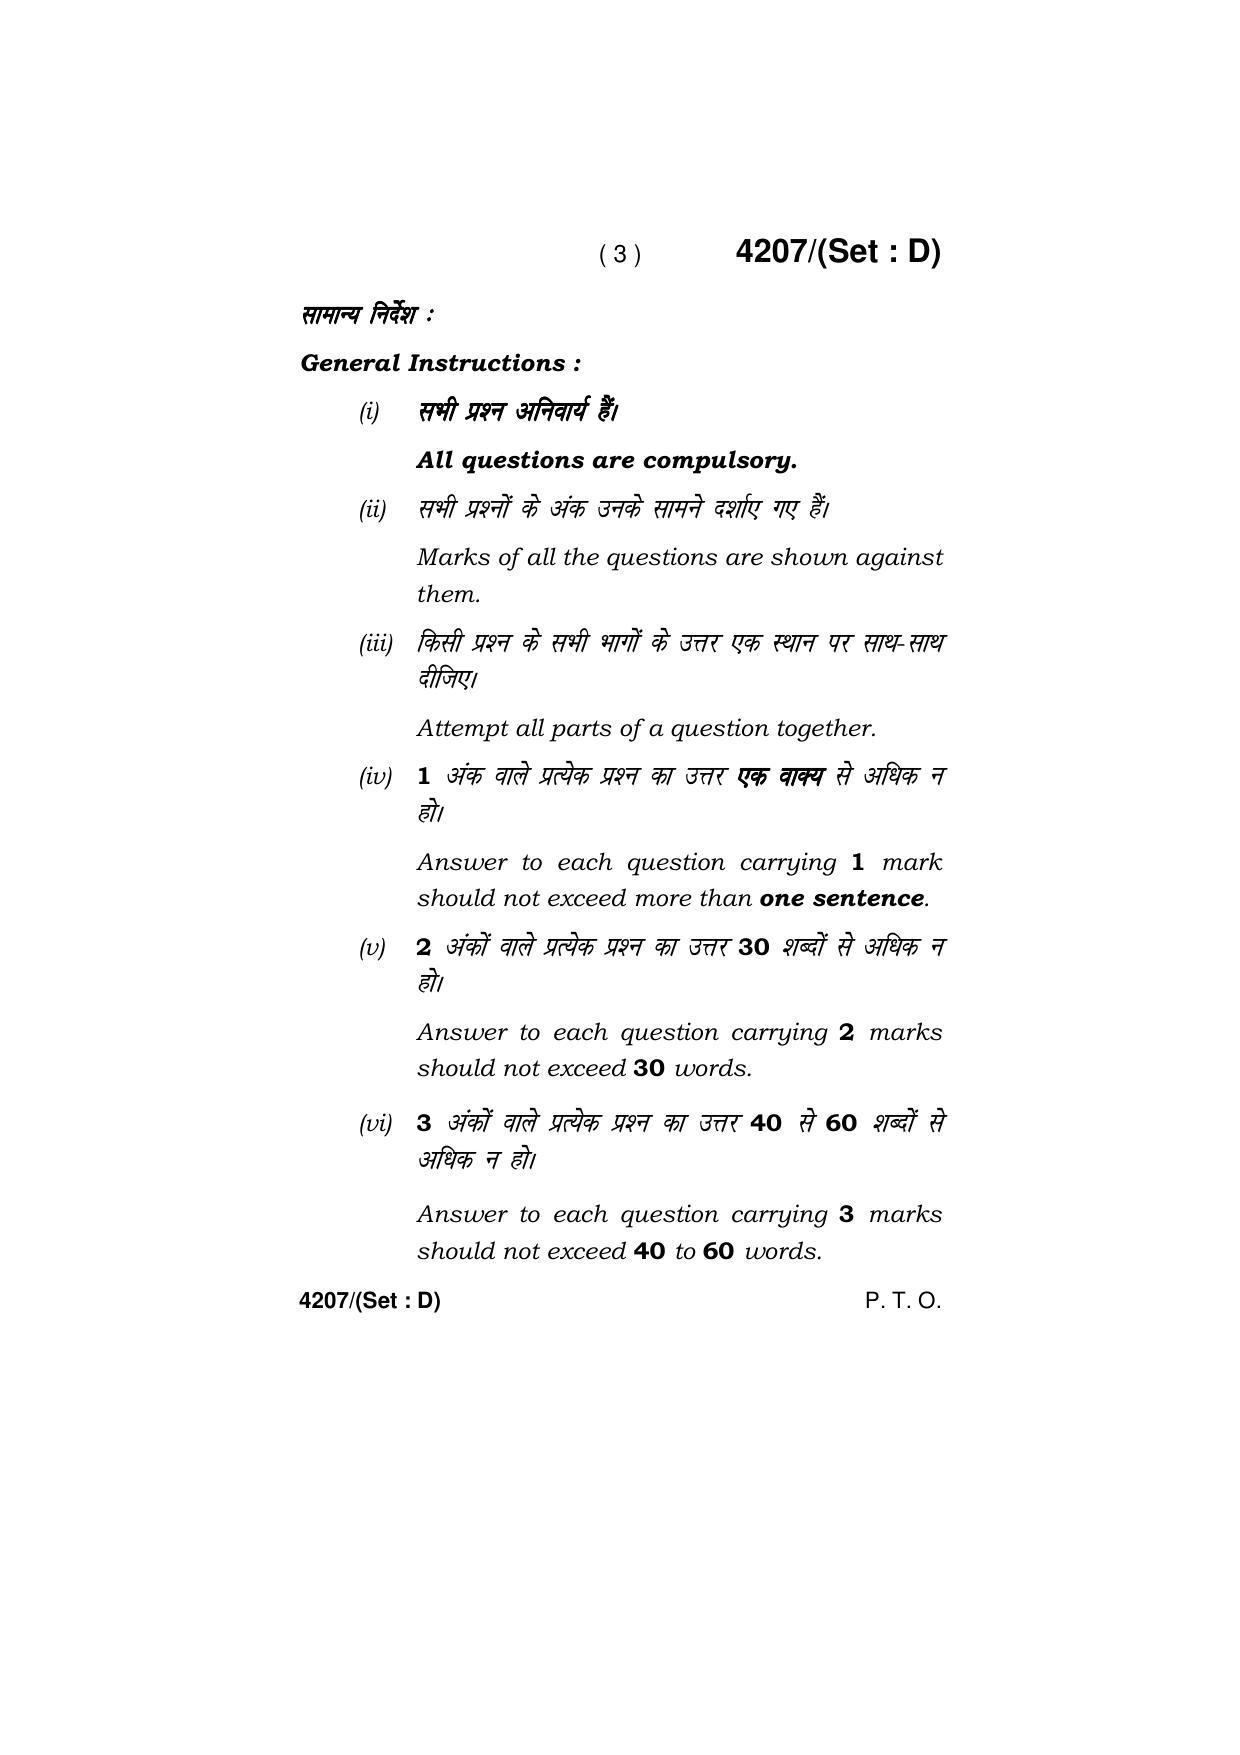 Haryana Board HBSE Class 10 Social Science (All Set) 2019 Question Paper - Page 48